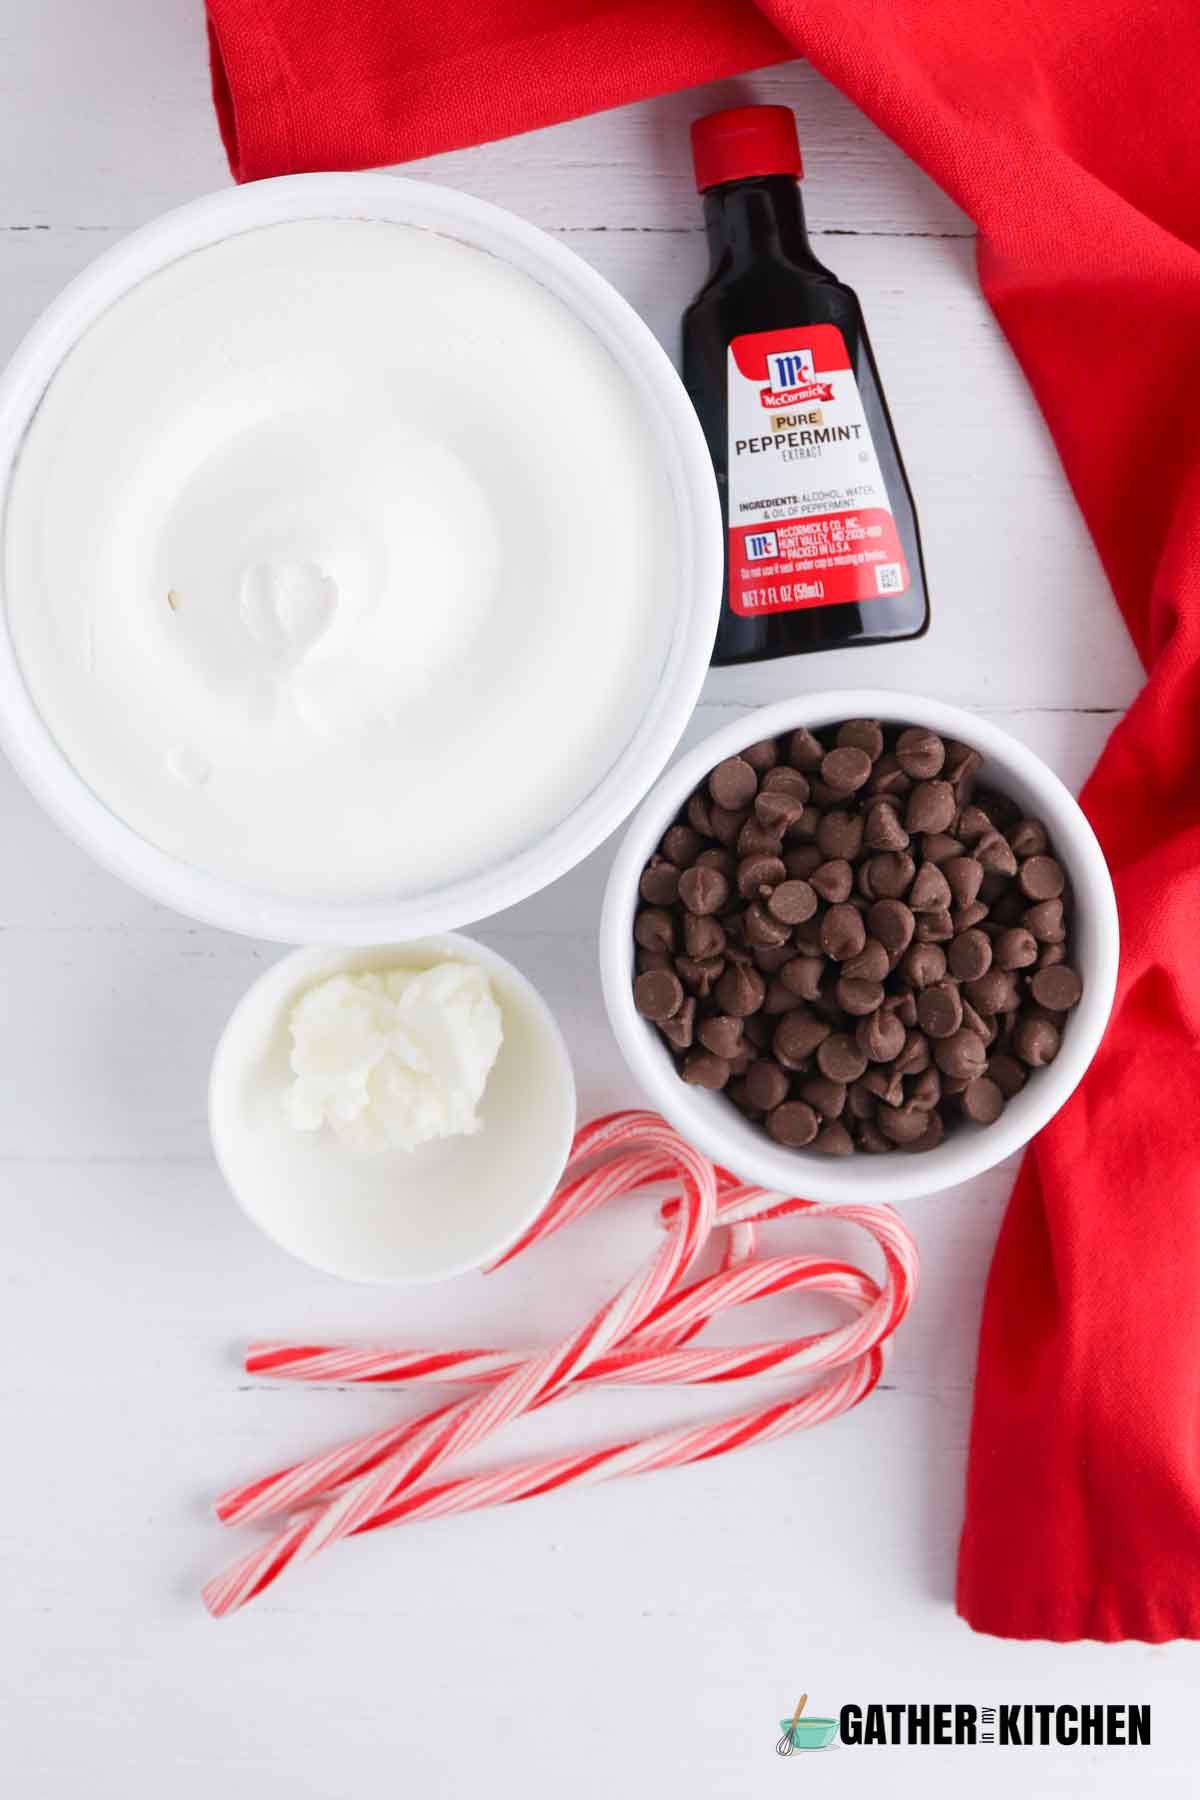 Ingredients: Cool Whip, milk chocolate chips, peppermint extract, vegetable shortening, and candy canes.